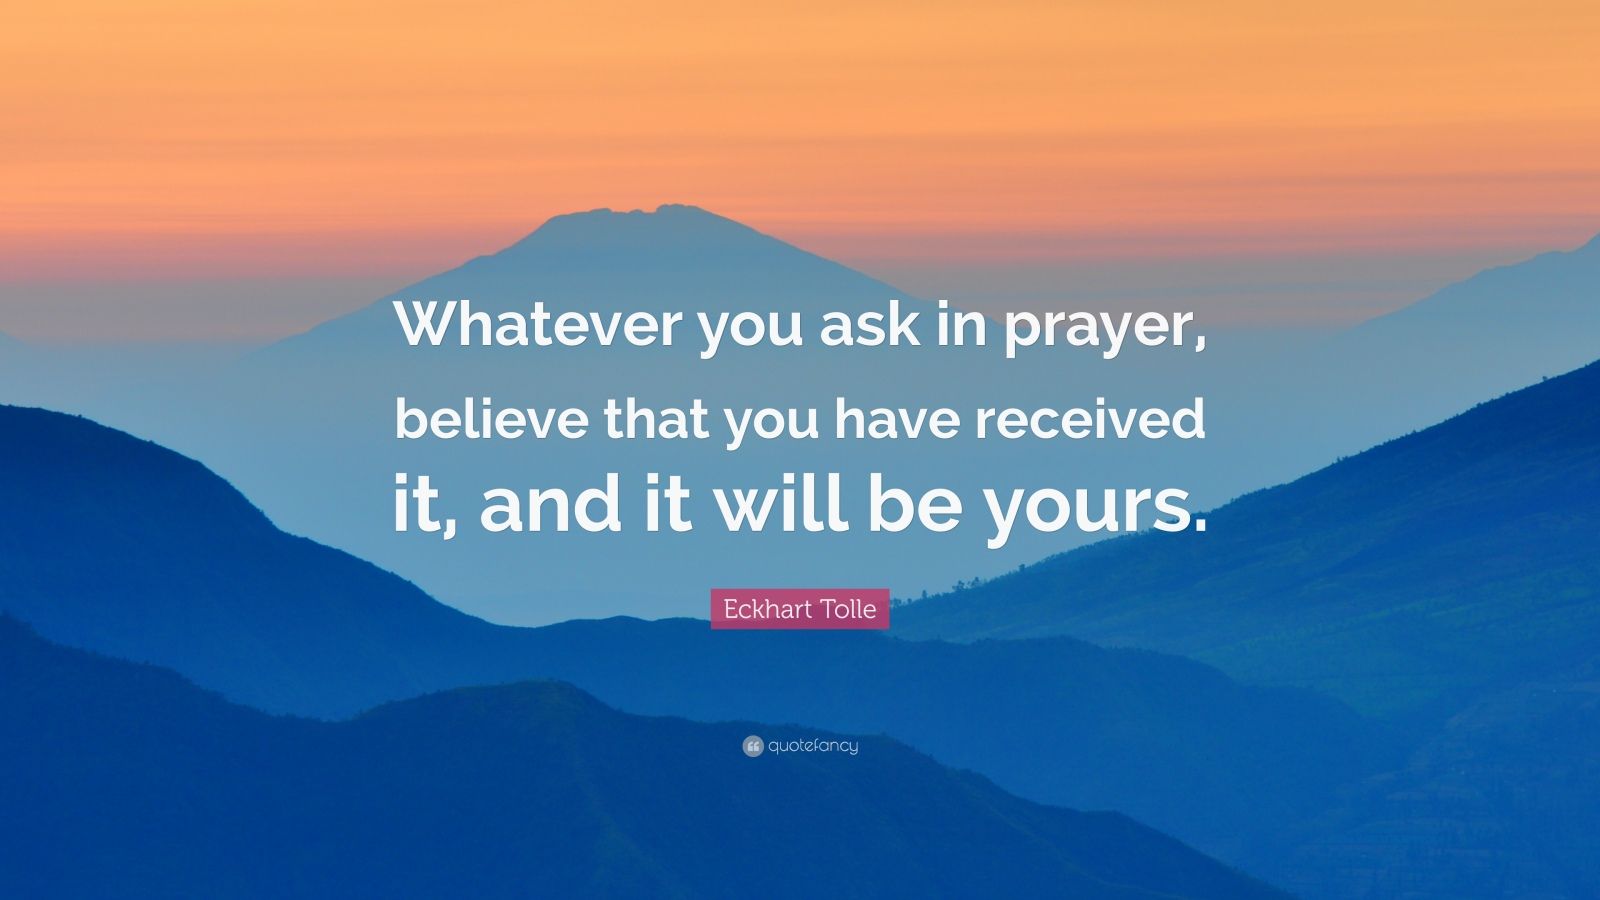 Eckhart Tolle Quote: “Whatever you ask in prayer, believe that you have